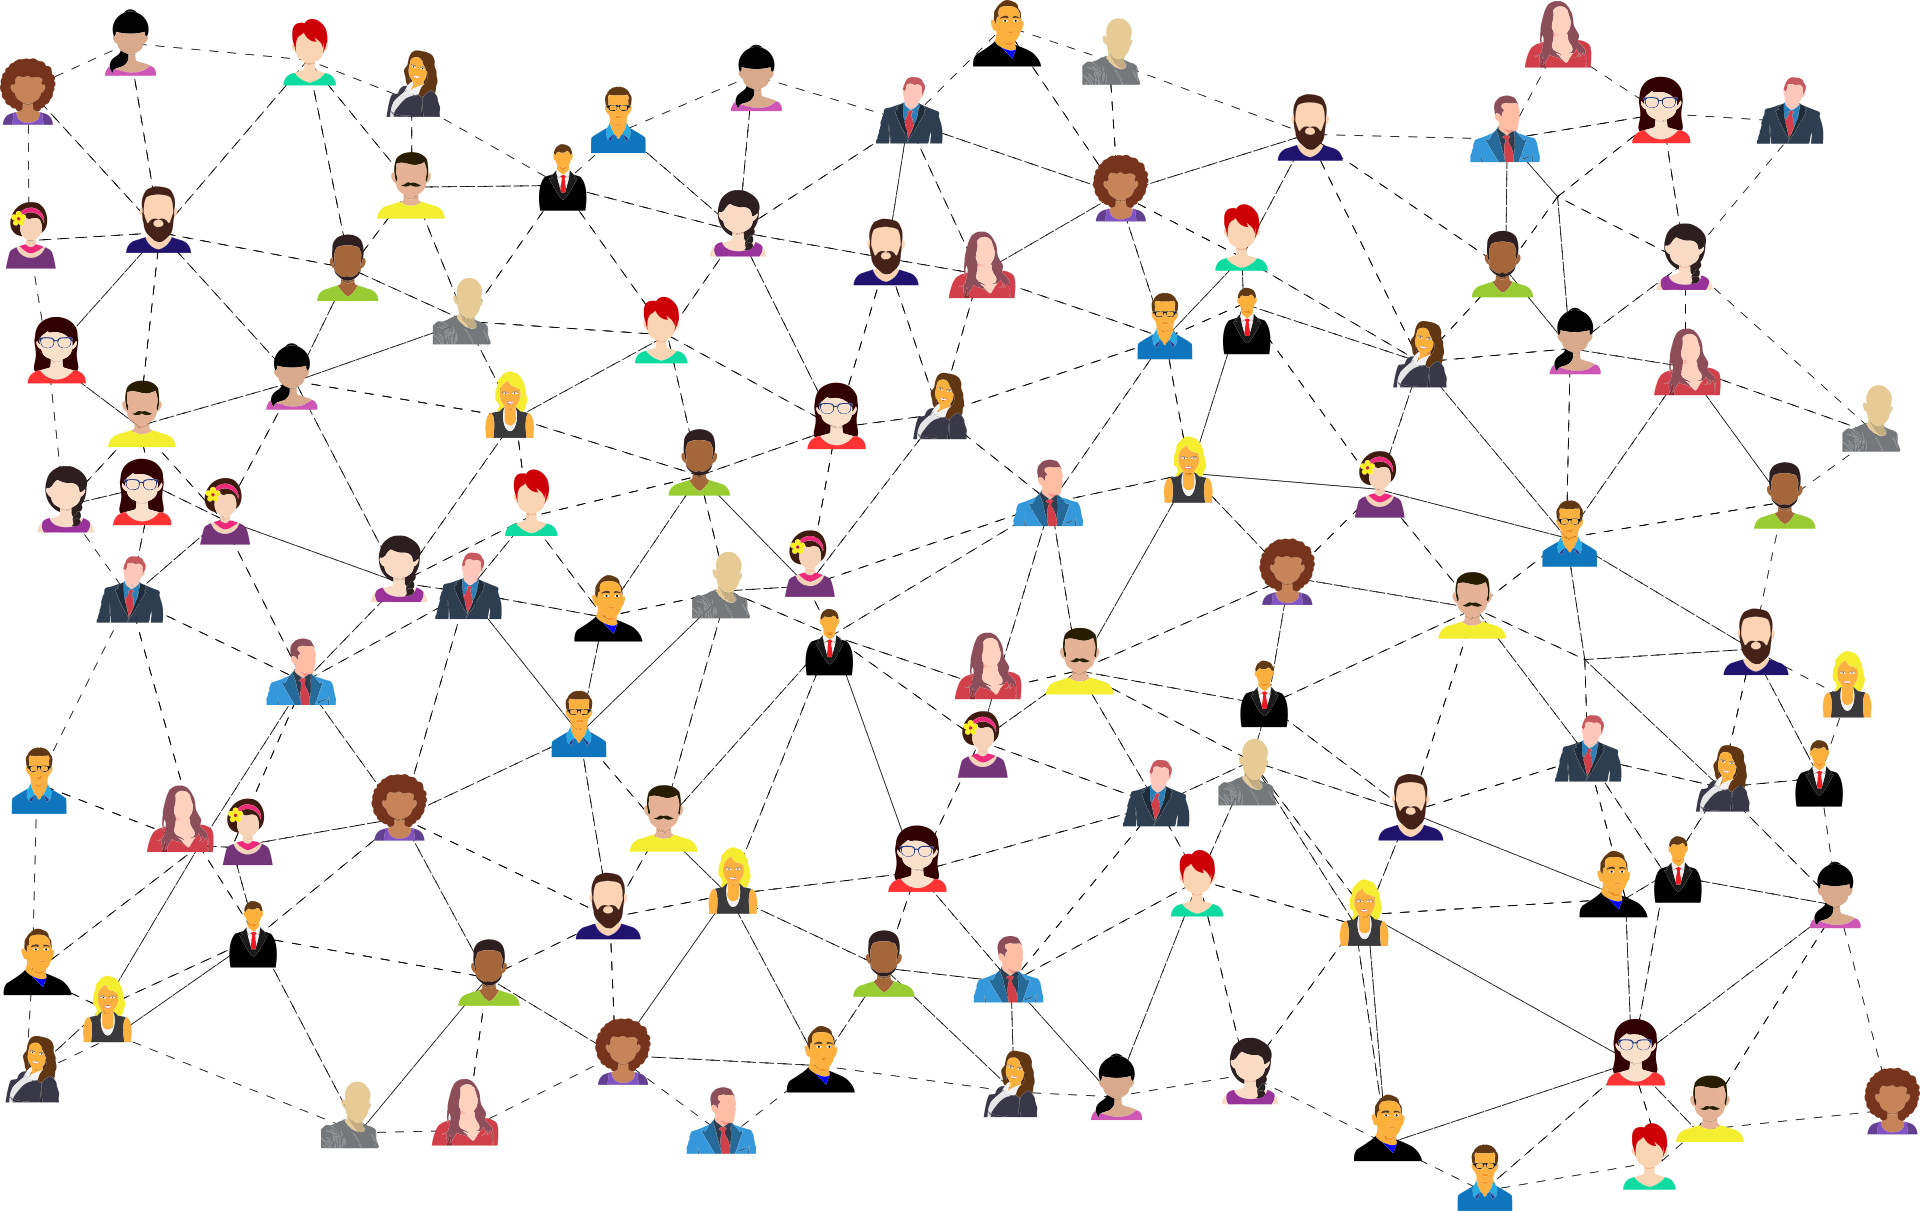 Illustration of many corporate employees of all races and genders connected through lines and dotted lines